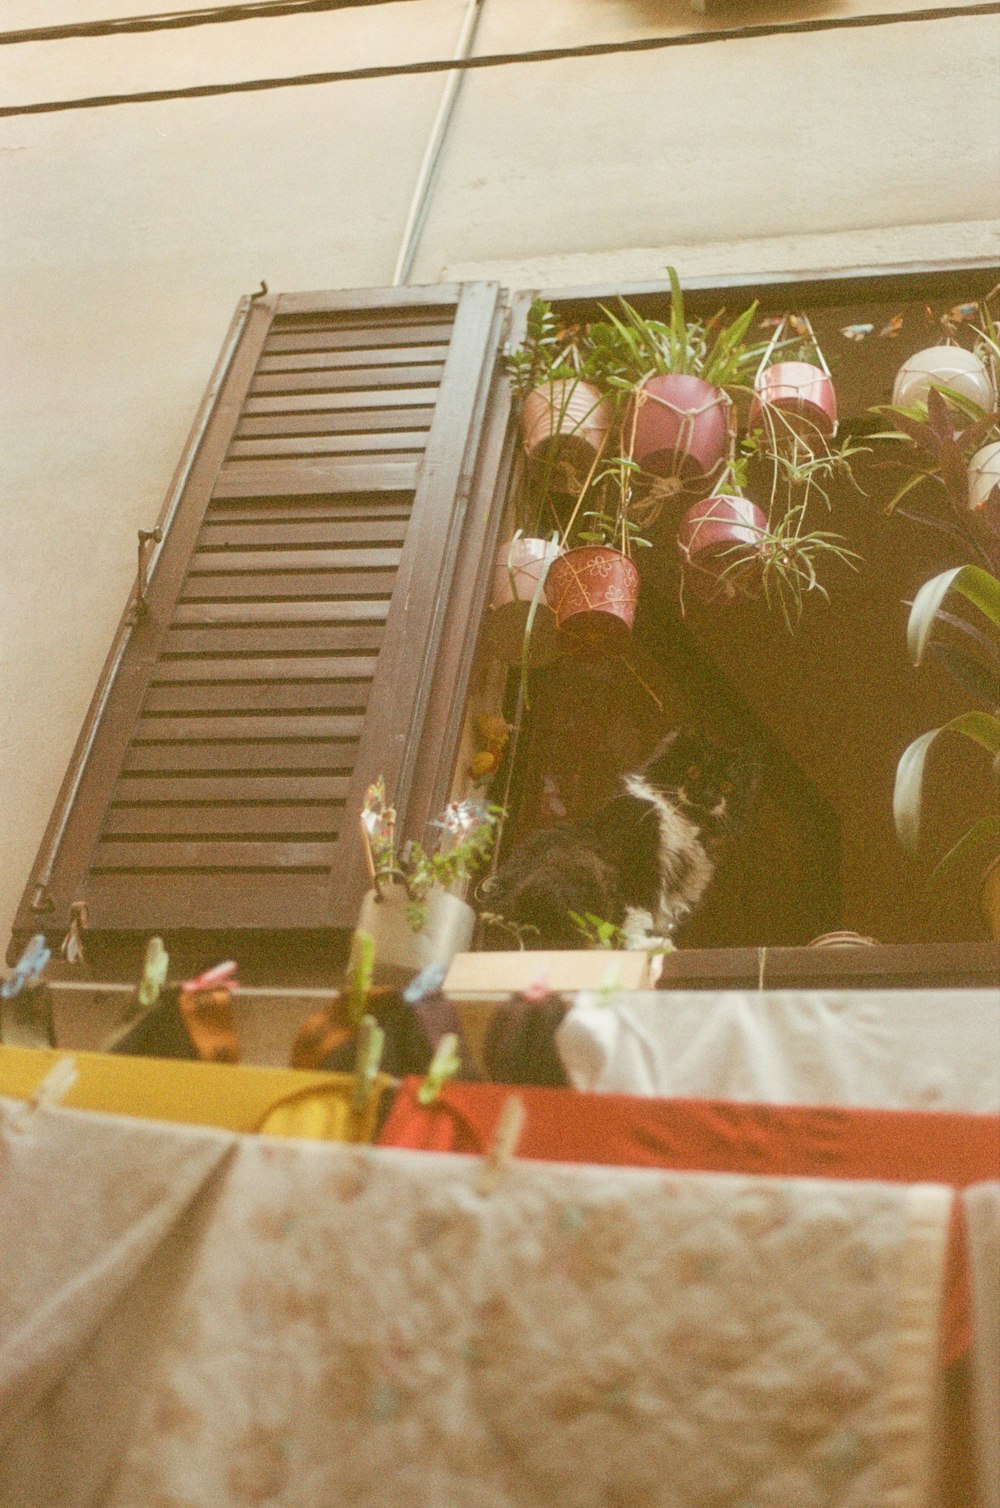 a cat sitting in a window sill next to a bunch of plants